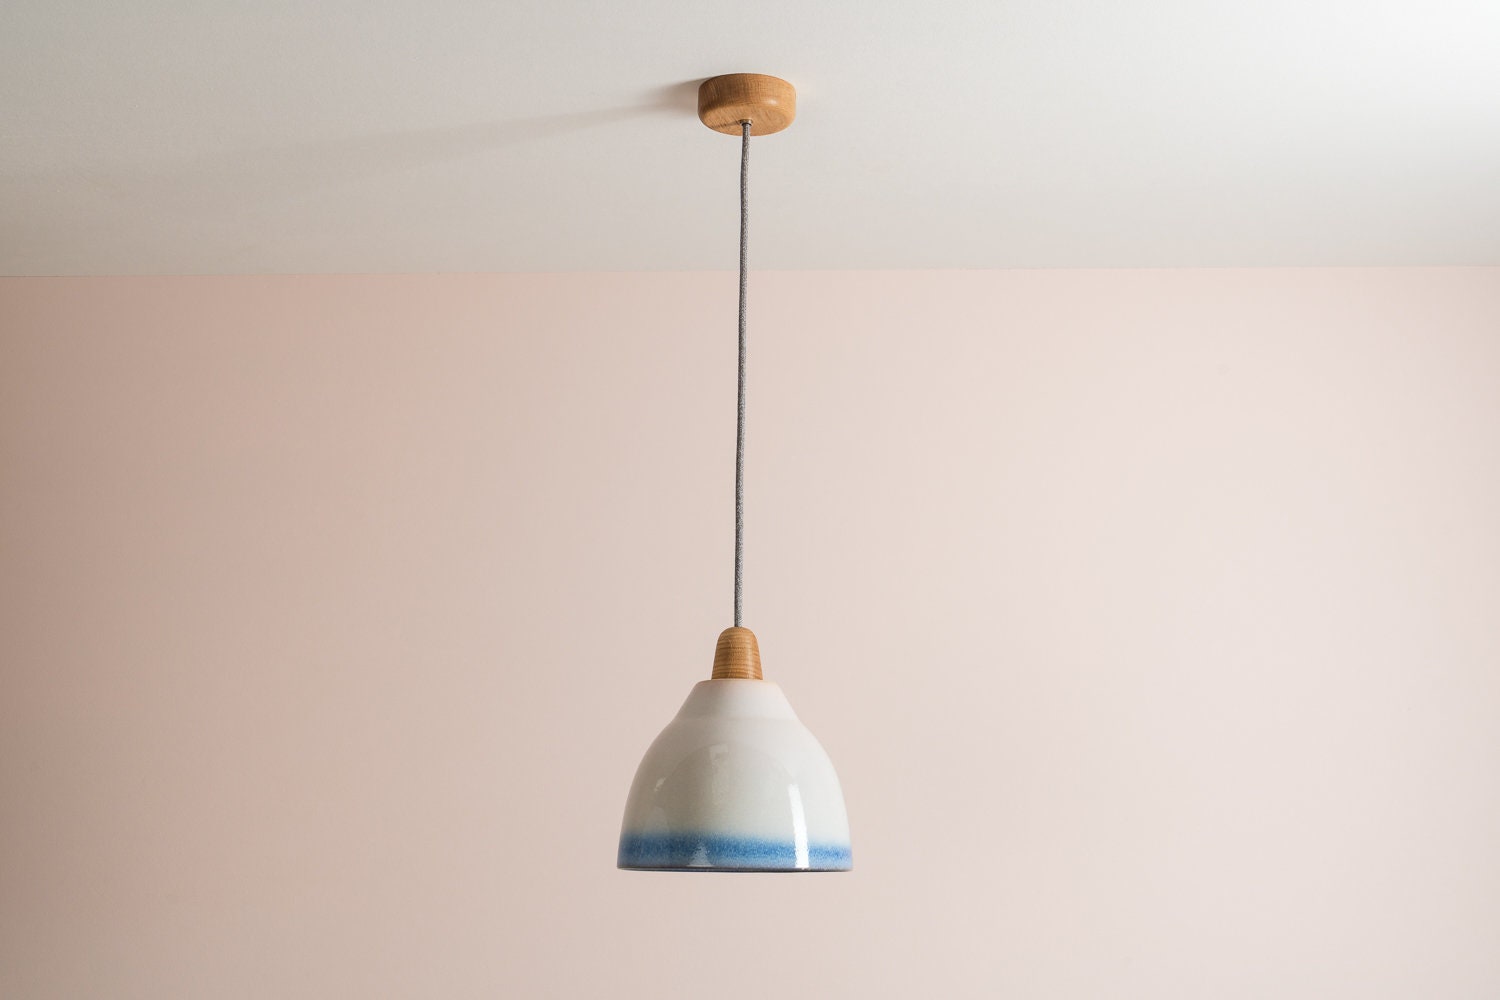 Element pendant with a blue and white gloss glaze by StudioHaran